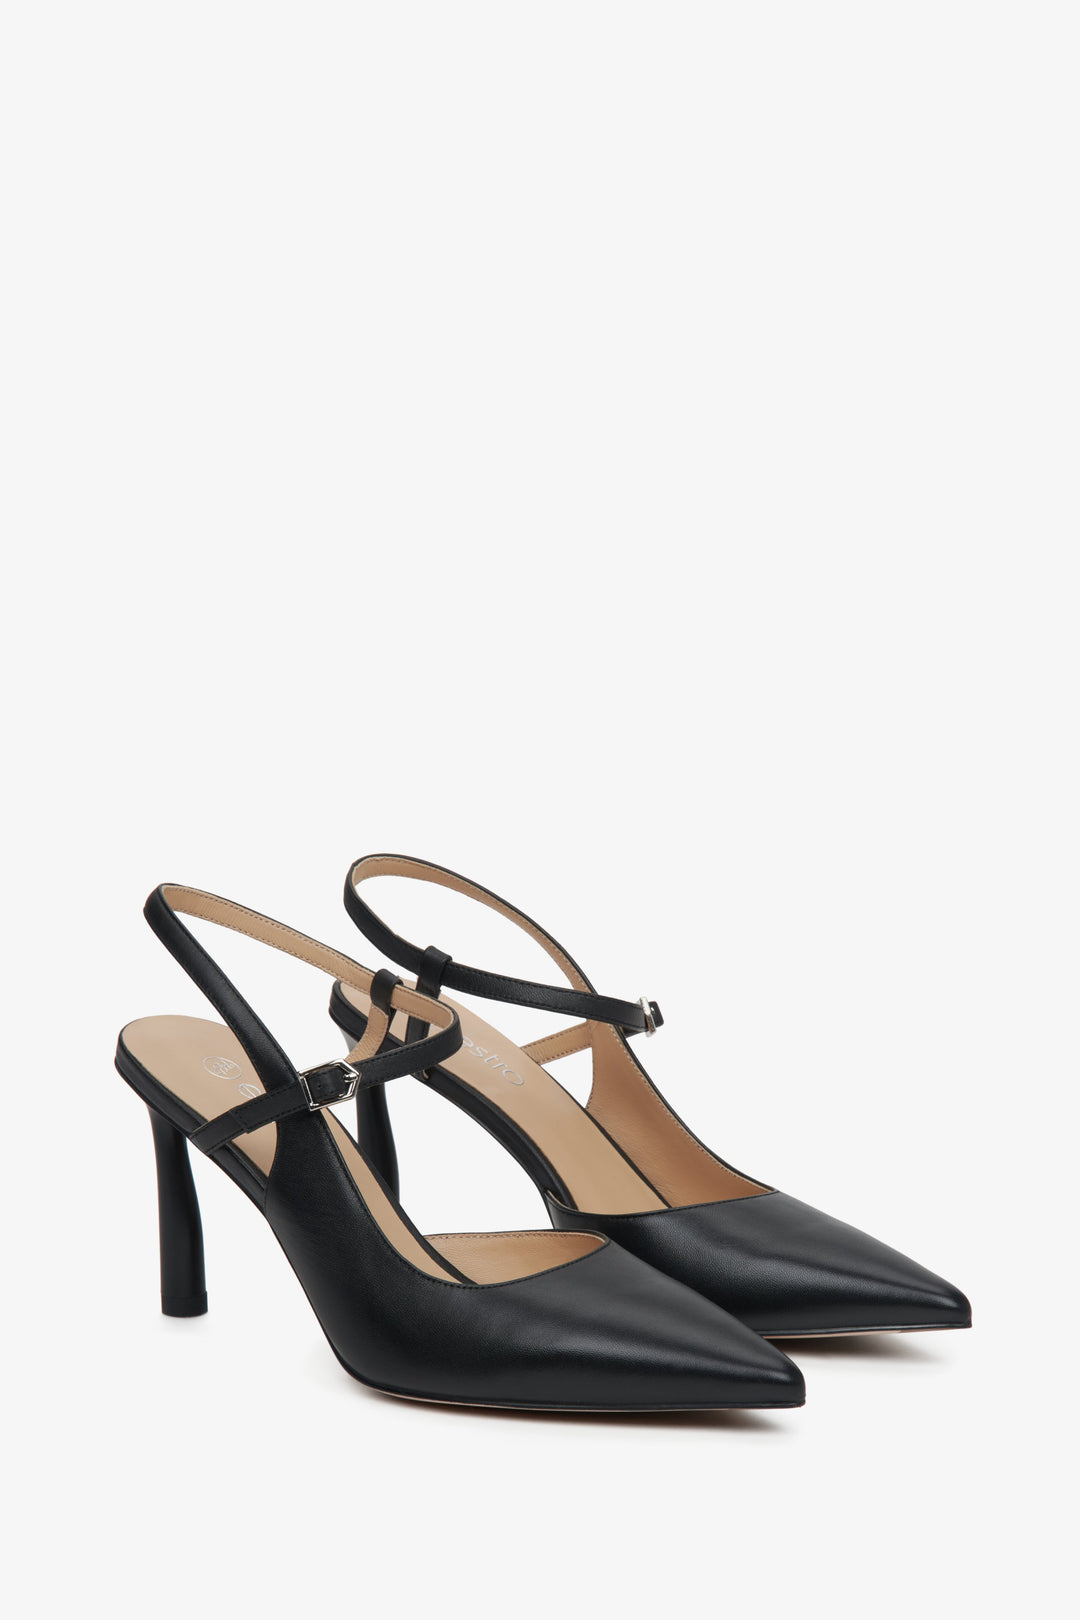 High heeled women's slingback shoes with a pointed toe in black.